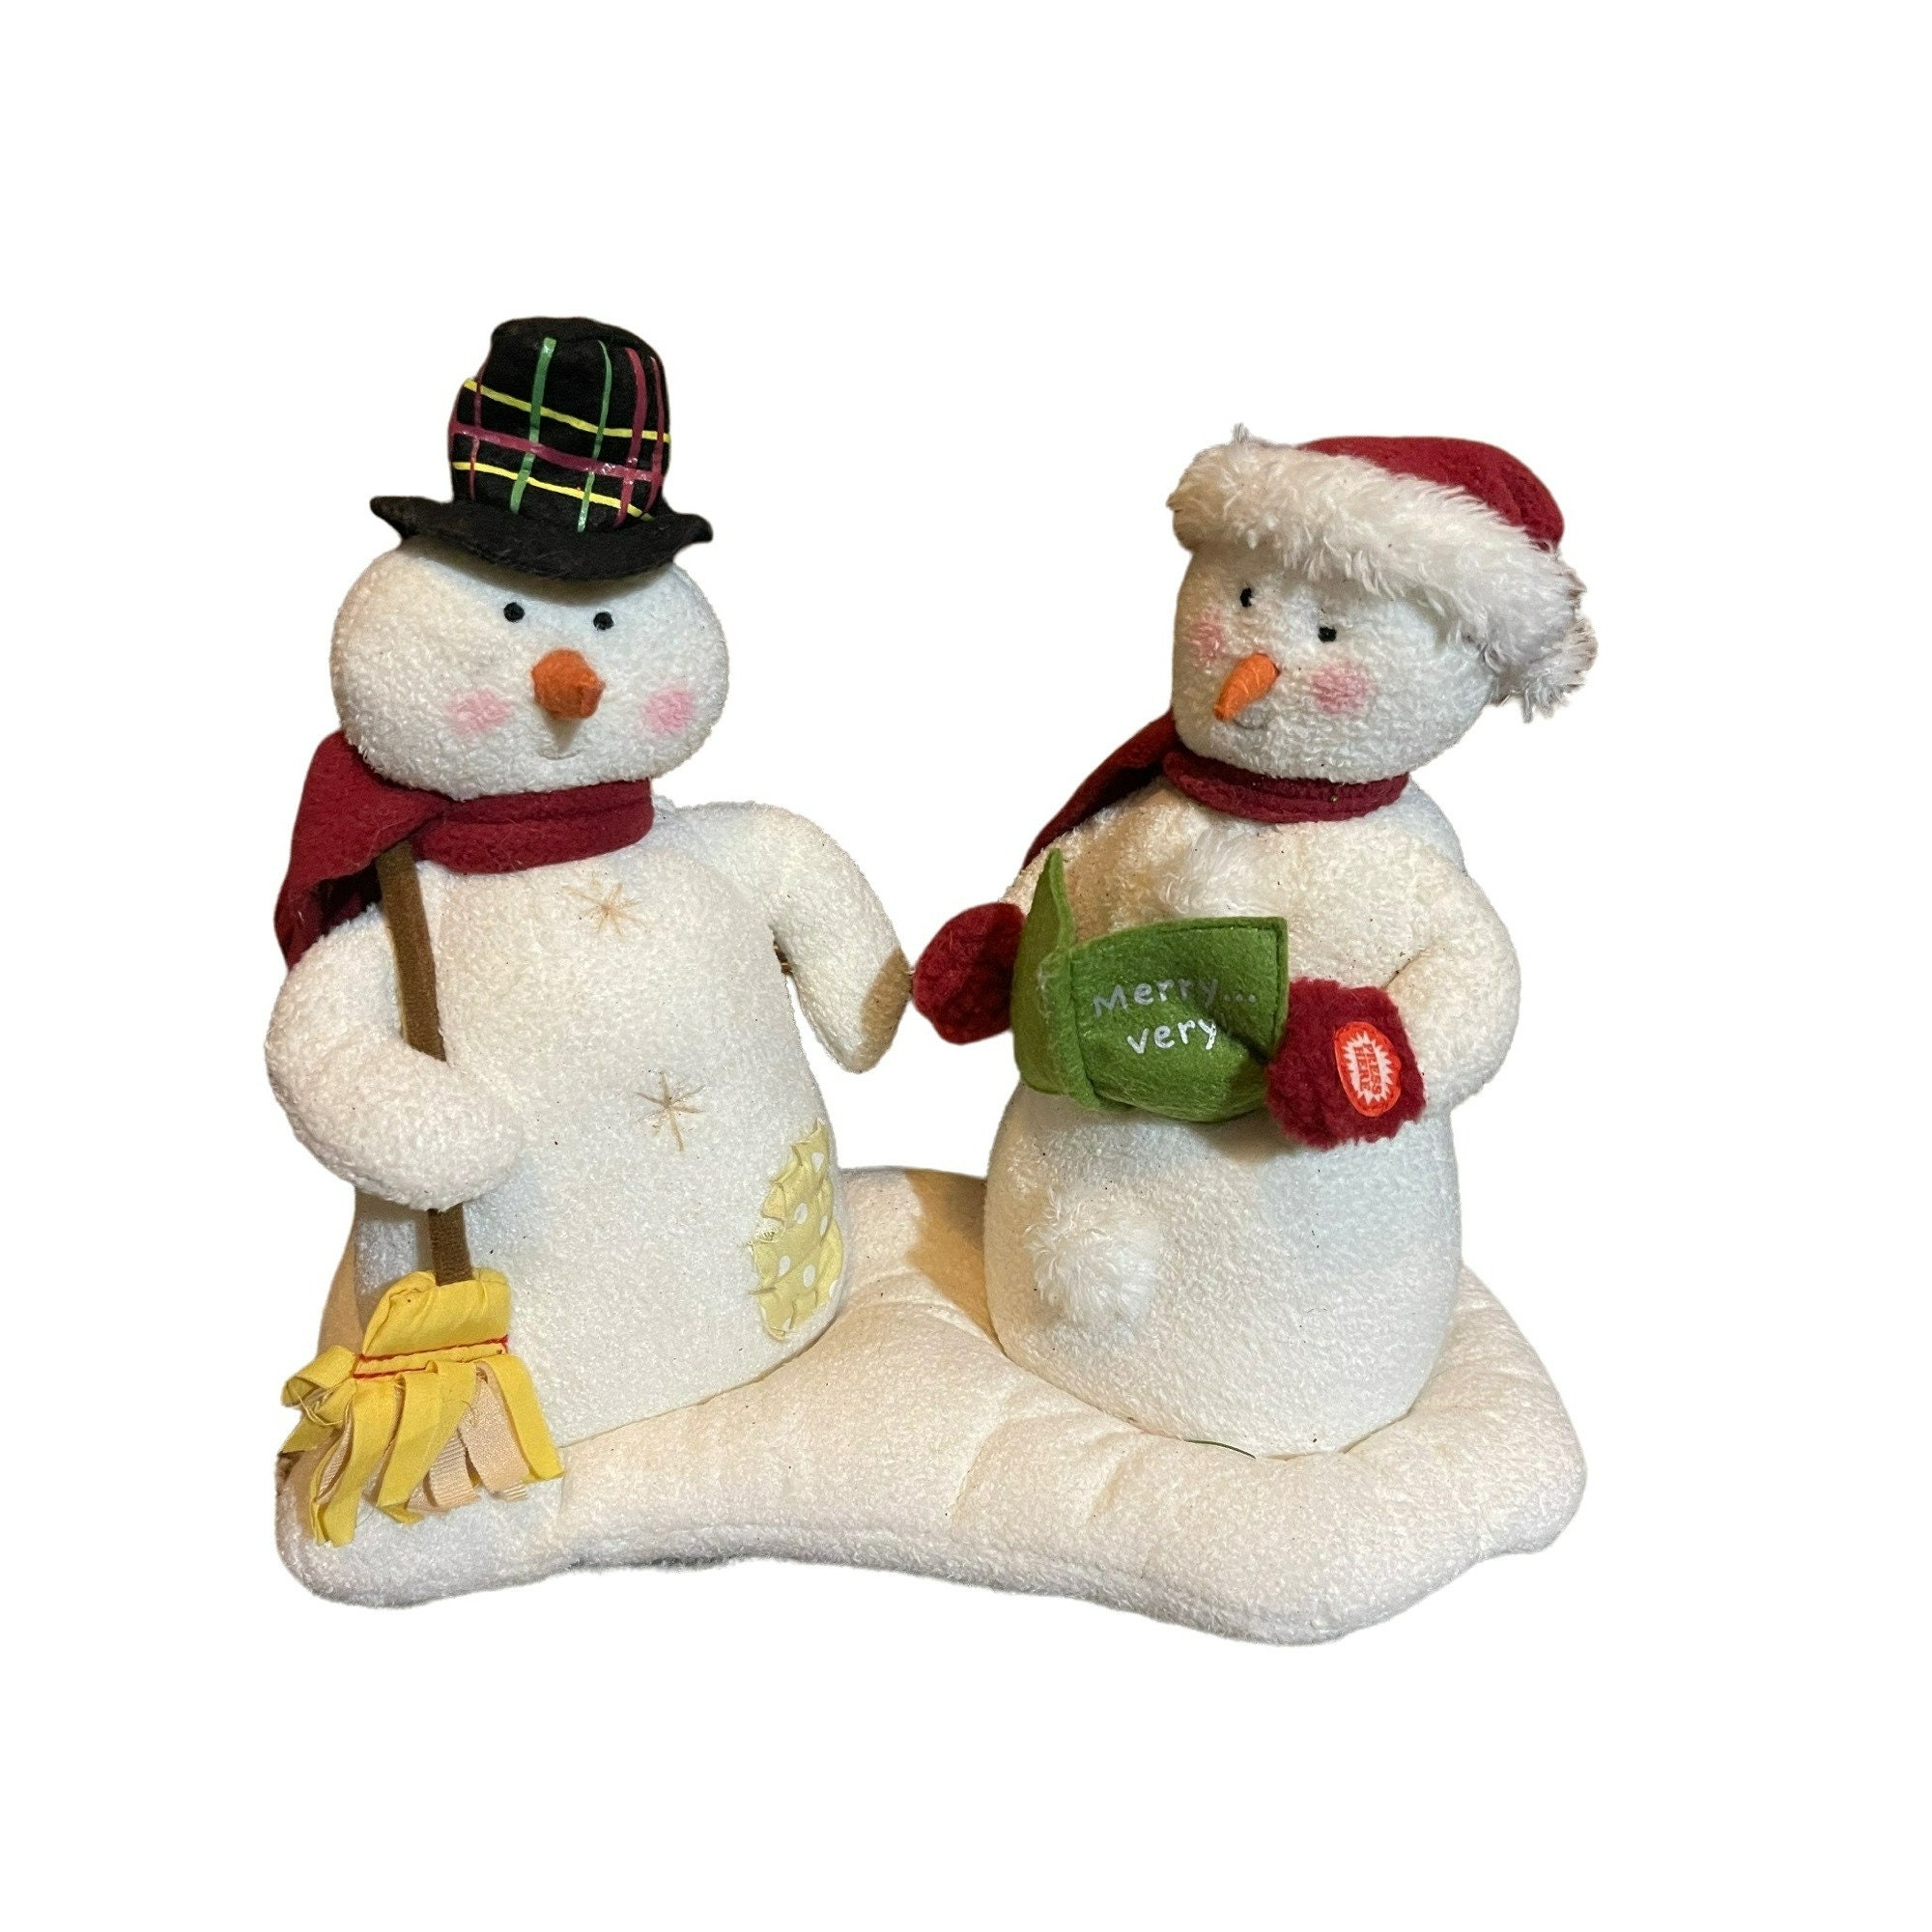 Mr and Mrs Snowman - Etsy